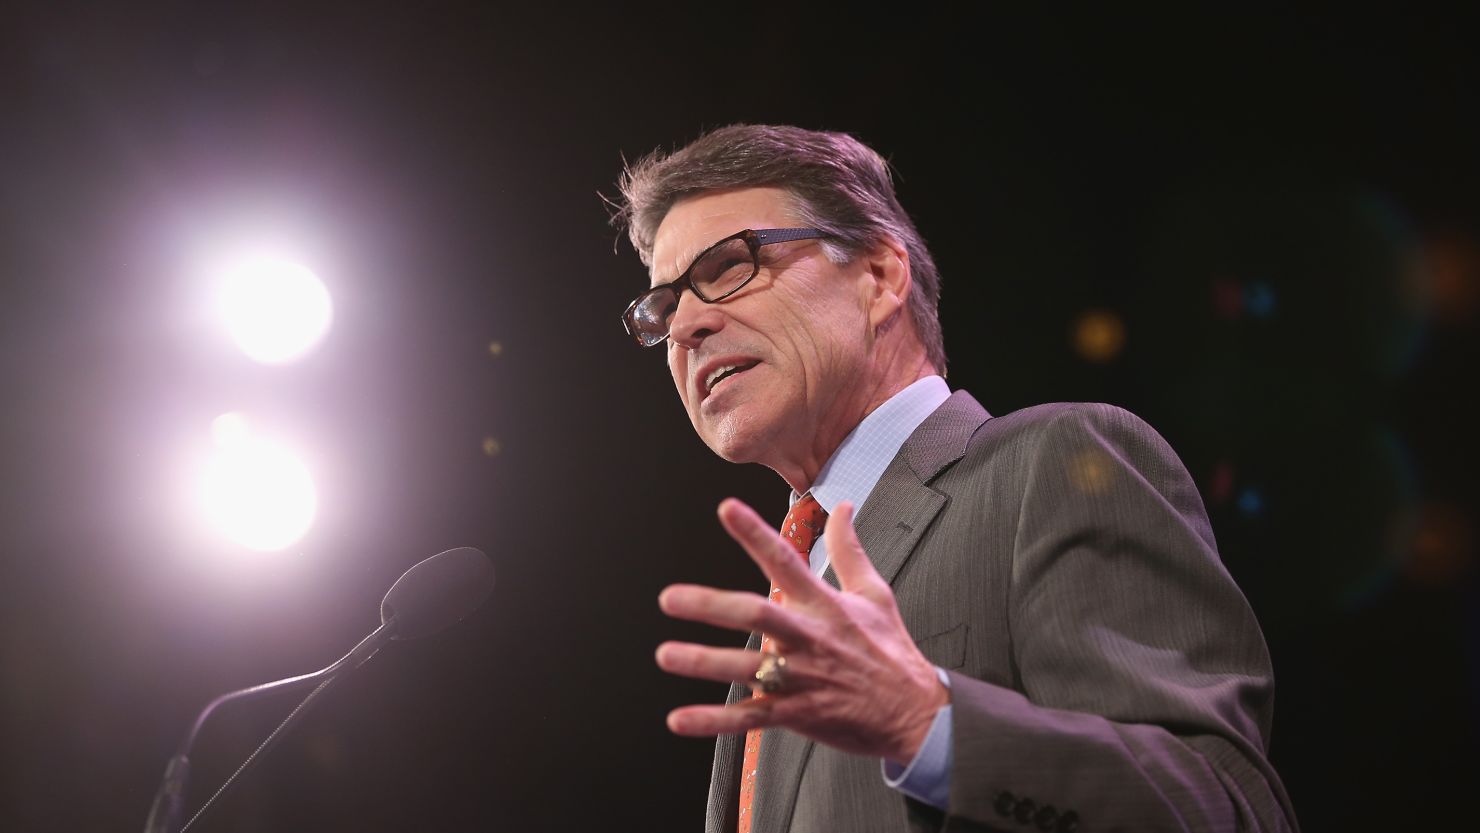 Former Texas Governor Rick Perry speaks to guests at the Iowa Freedom Summit on January 24, 2015 in Des Moines, Iowa.